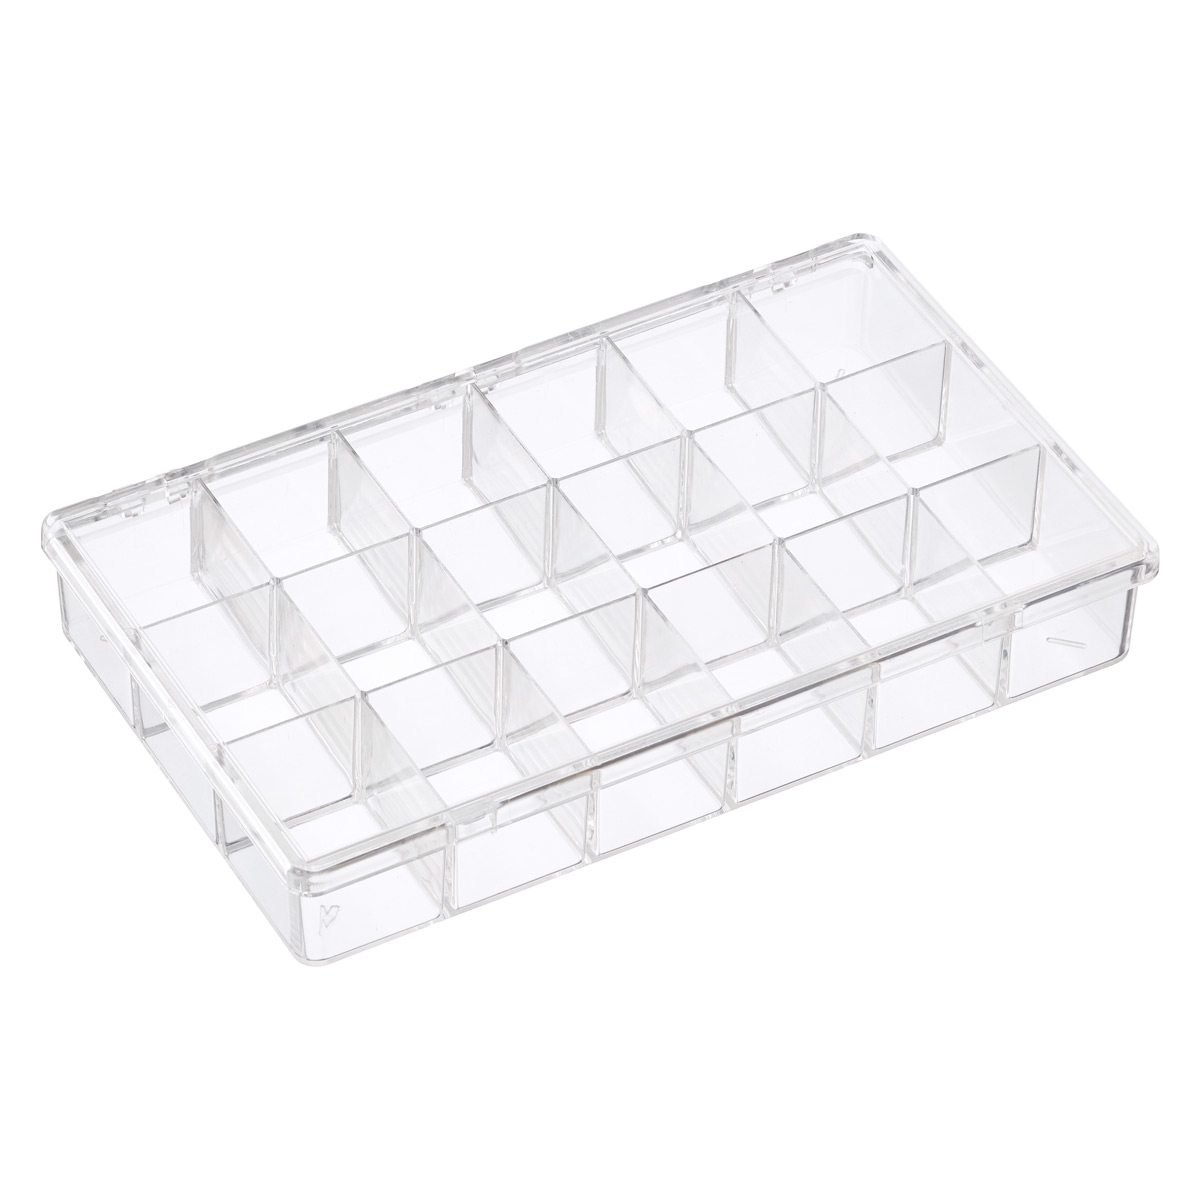 https://www.containerstore.com/catalogimages/288331/312310_18CompartmentBoxV2_1200.jpg